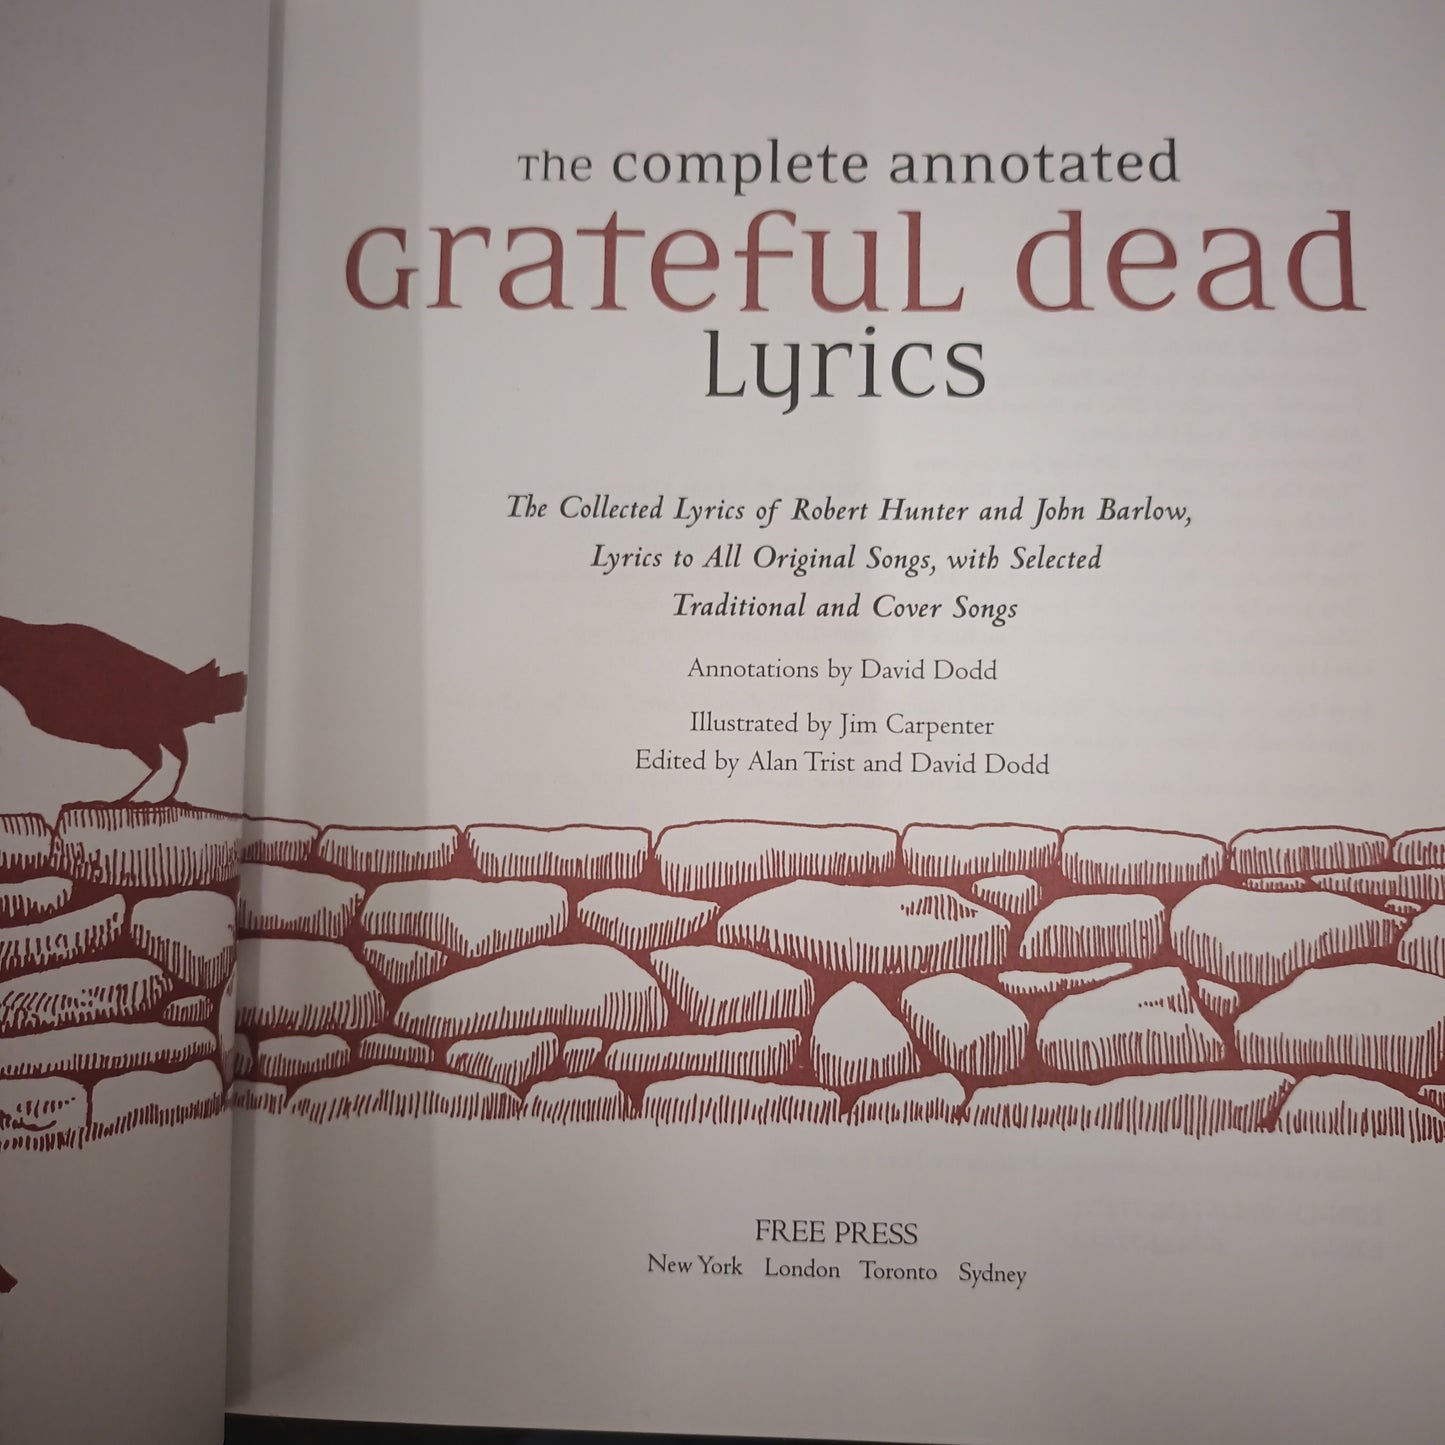 The Complete Annotated Grateful Dead Lyrics Hard Back Book By Grateful Dead